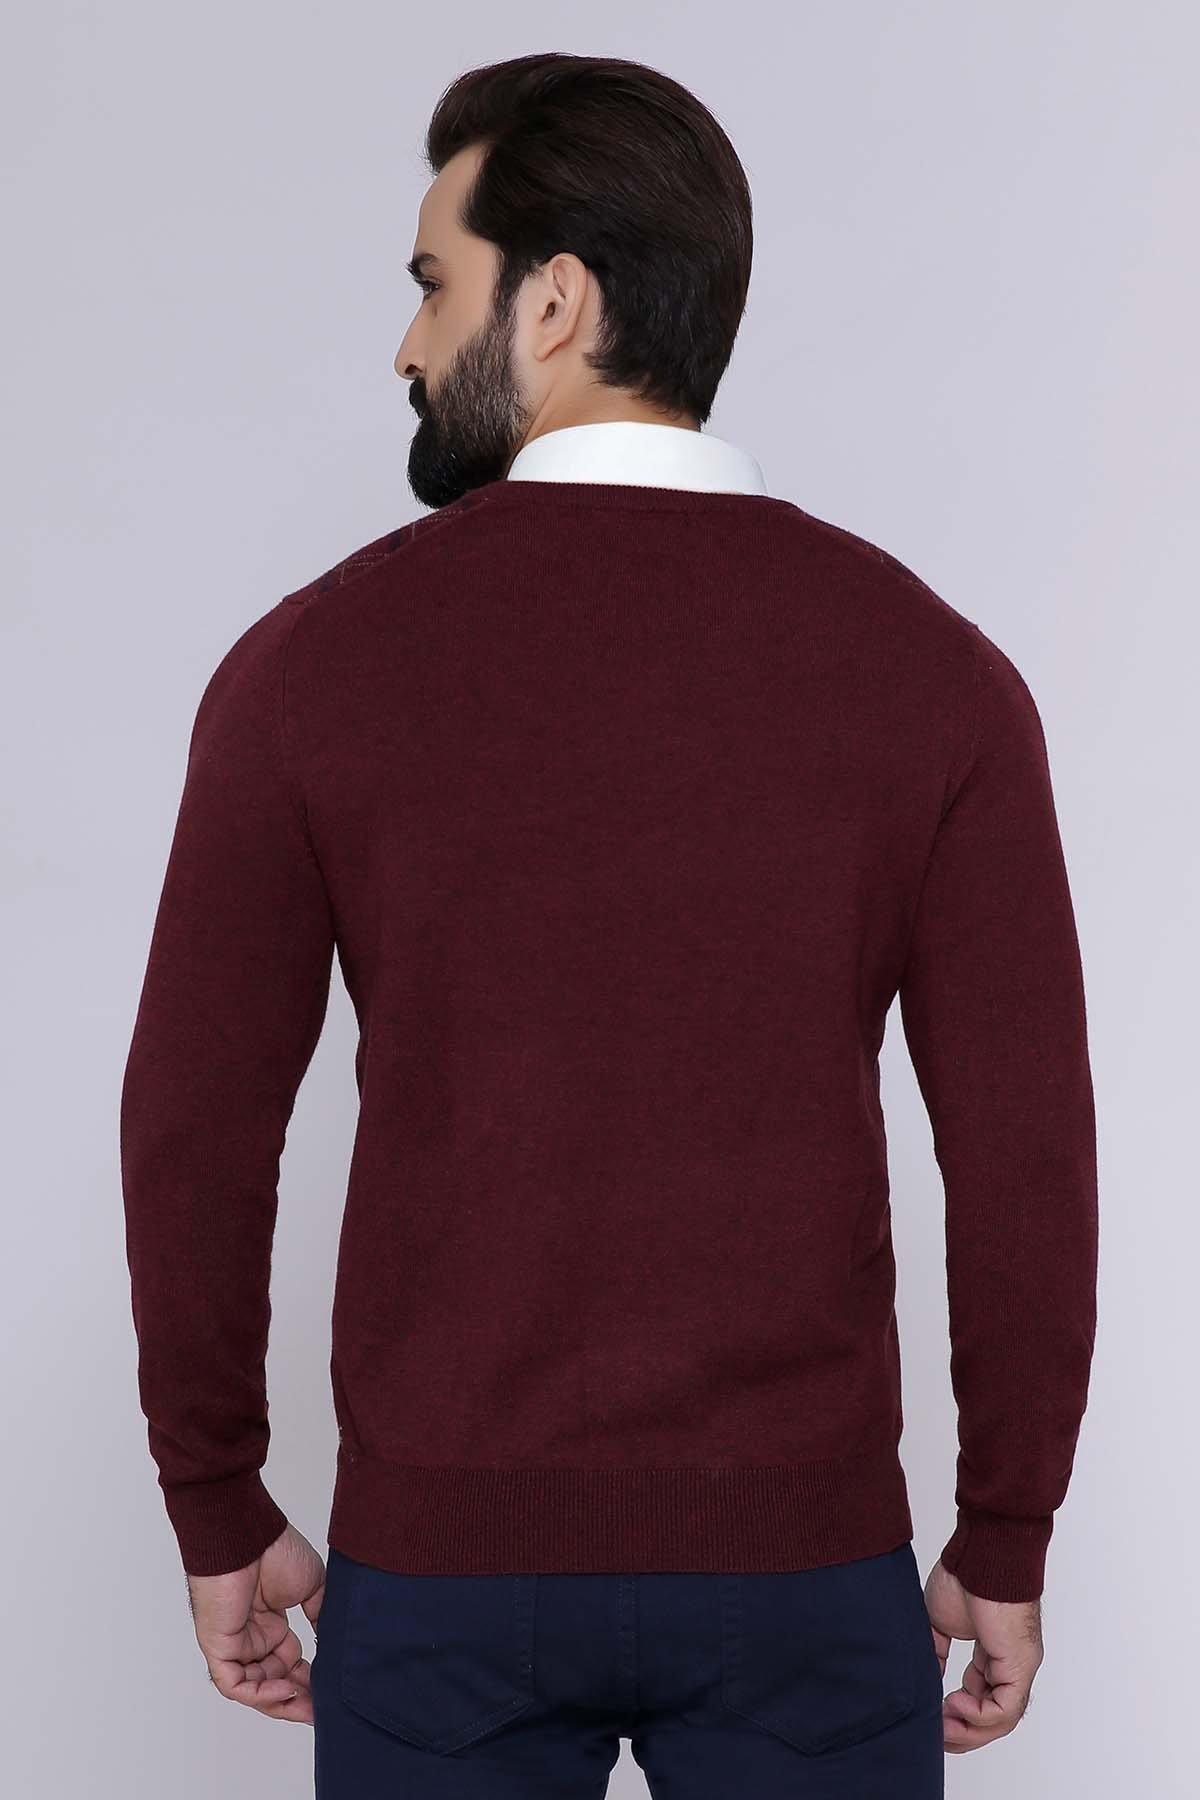 SWEATER V NECK FULL SLEEVE MAROON at Charcoal Clothing